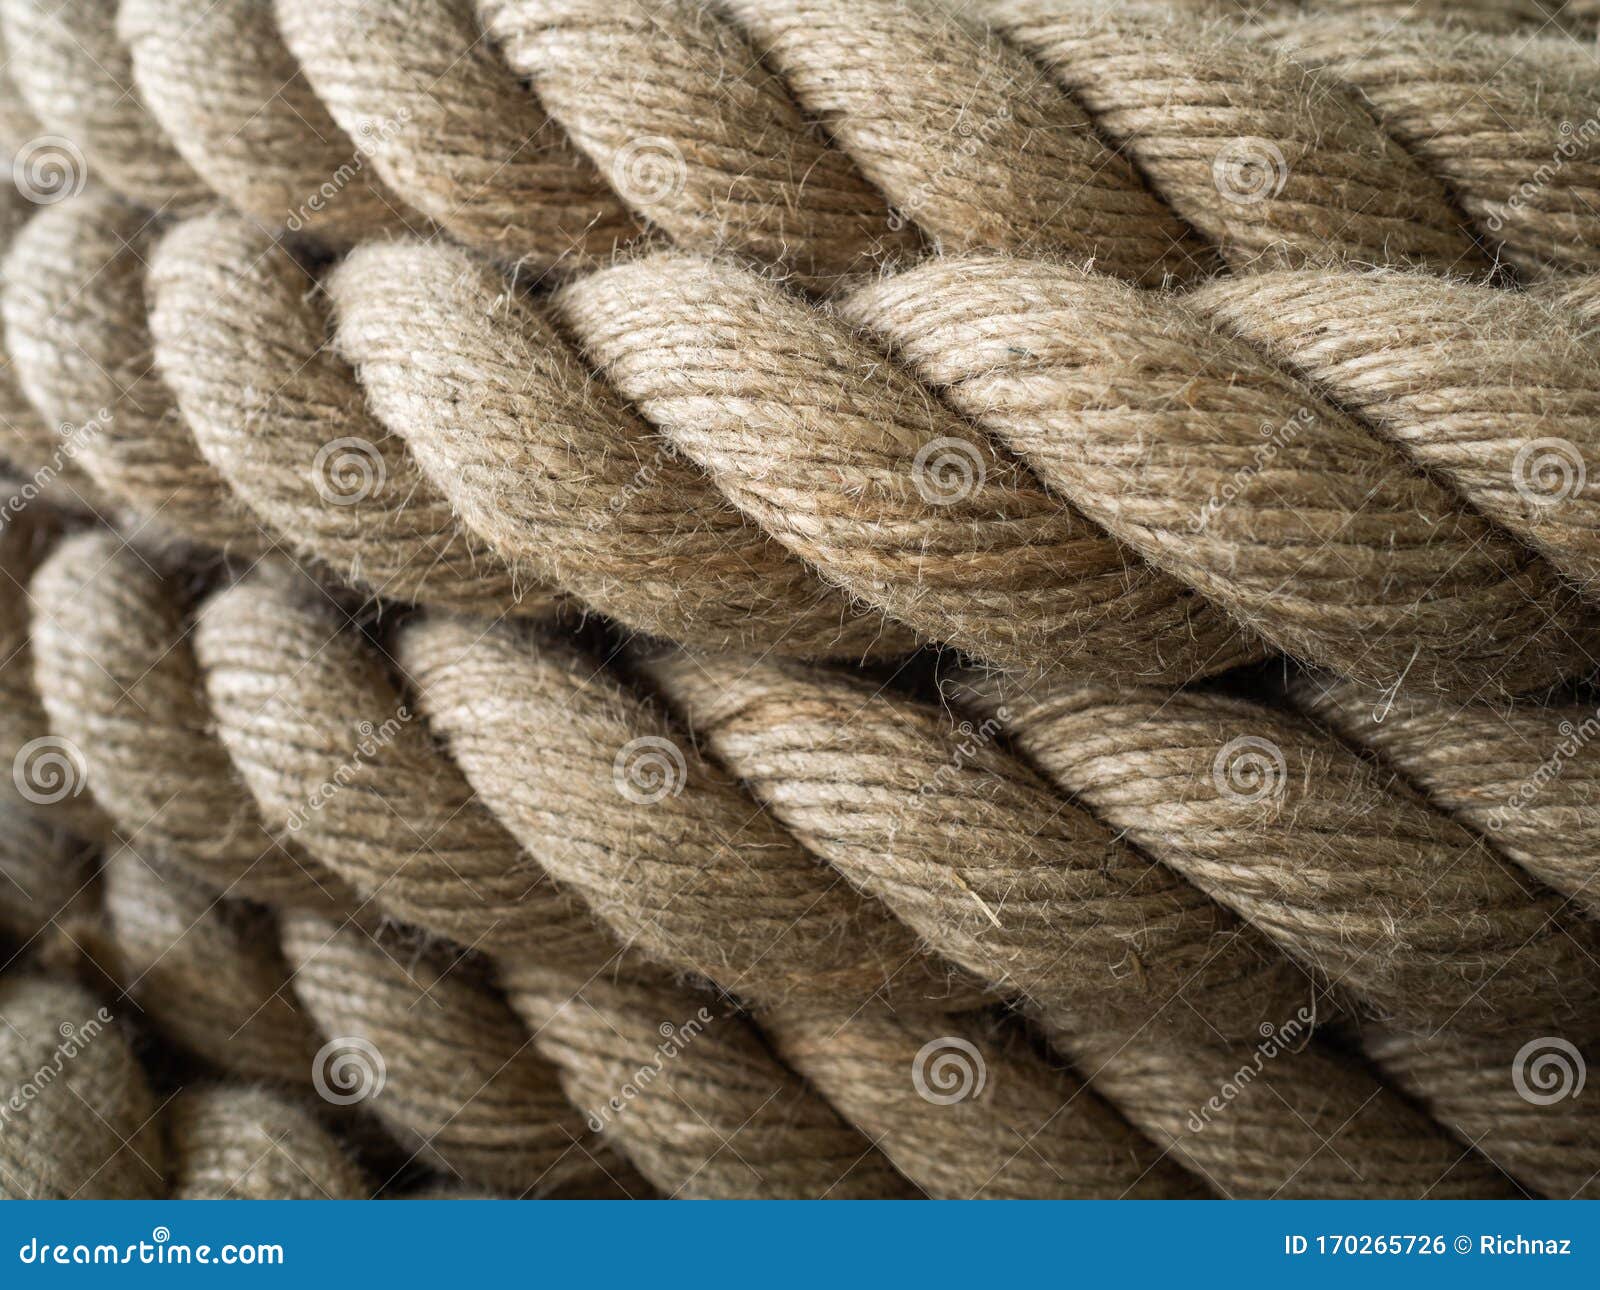 https://thumbs.dreamstime.com/z/thick-rope-twisted-roll-long-rope-wide-use-thick-rope-twisted-roll-long-rope-wide-use-texture-170265726.jpg